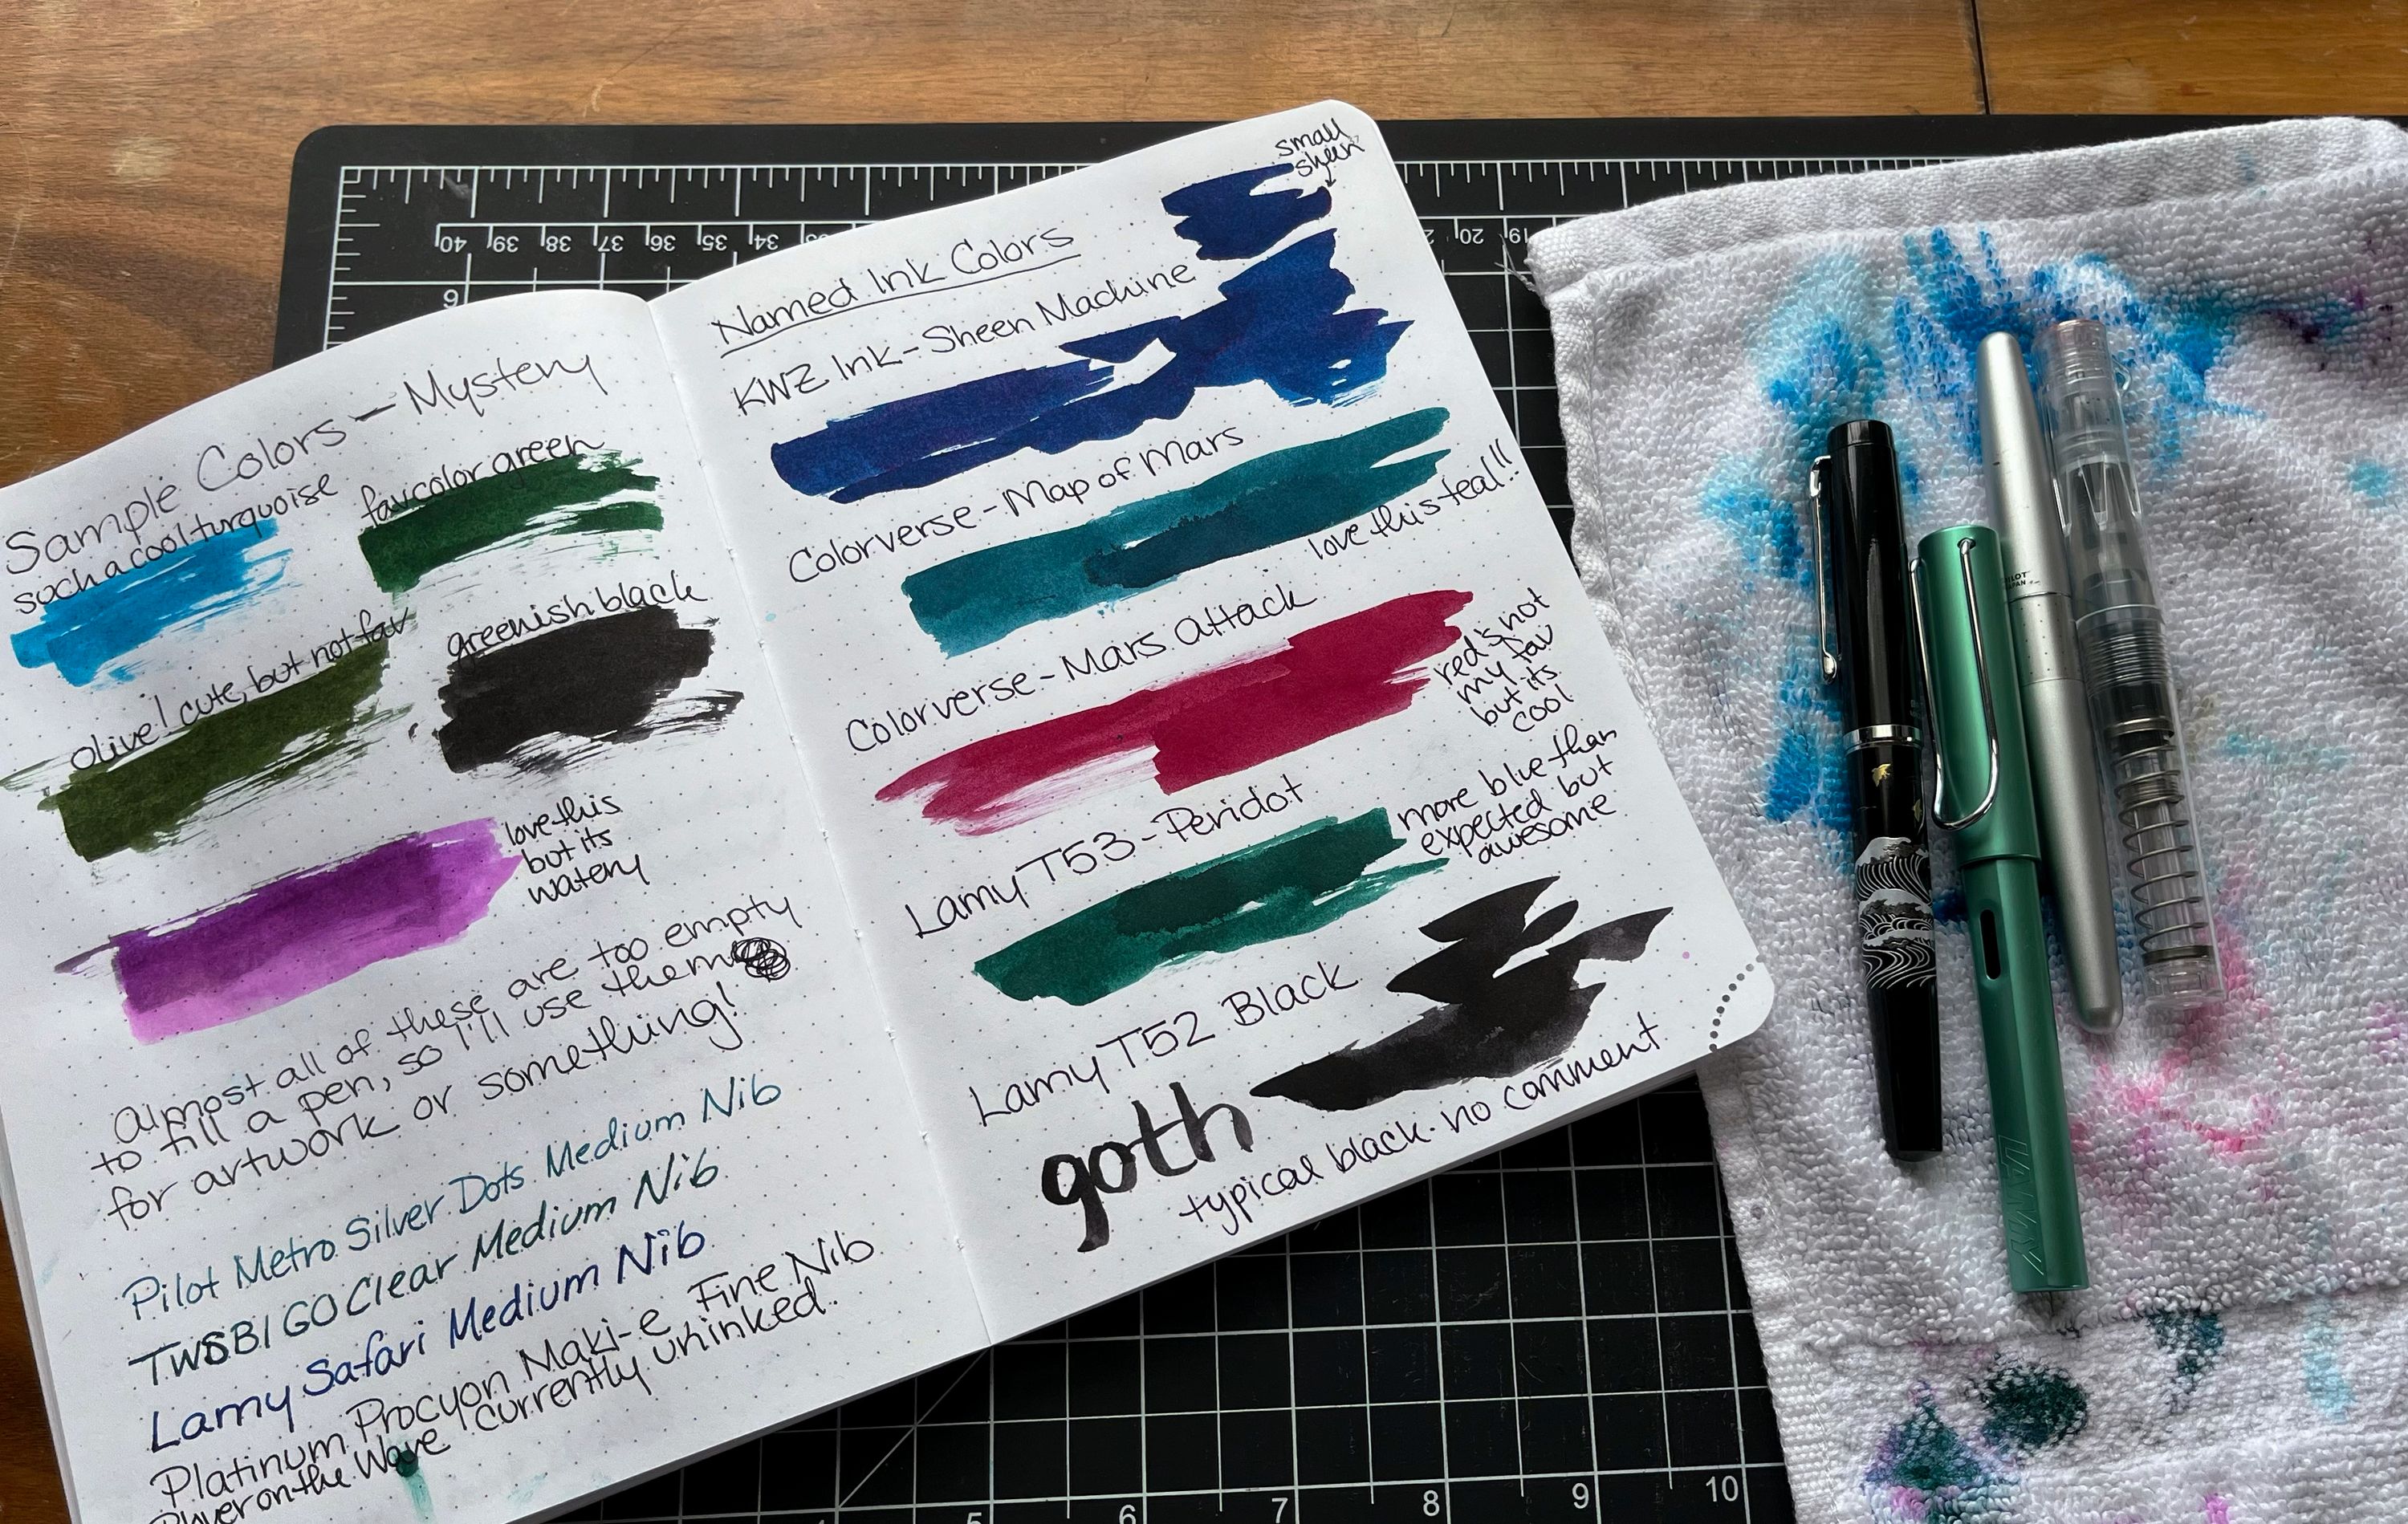 Final – I swatched all the inks and inked the pens, and did that on the Cortex Subtle Journal from Cortex Brand